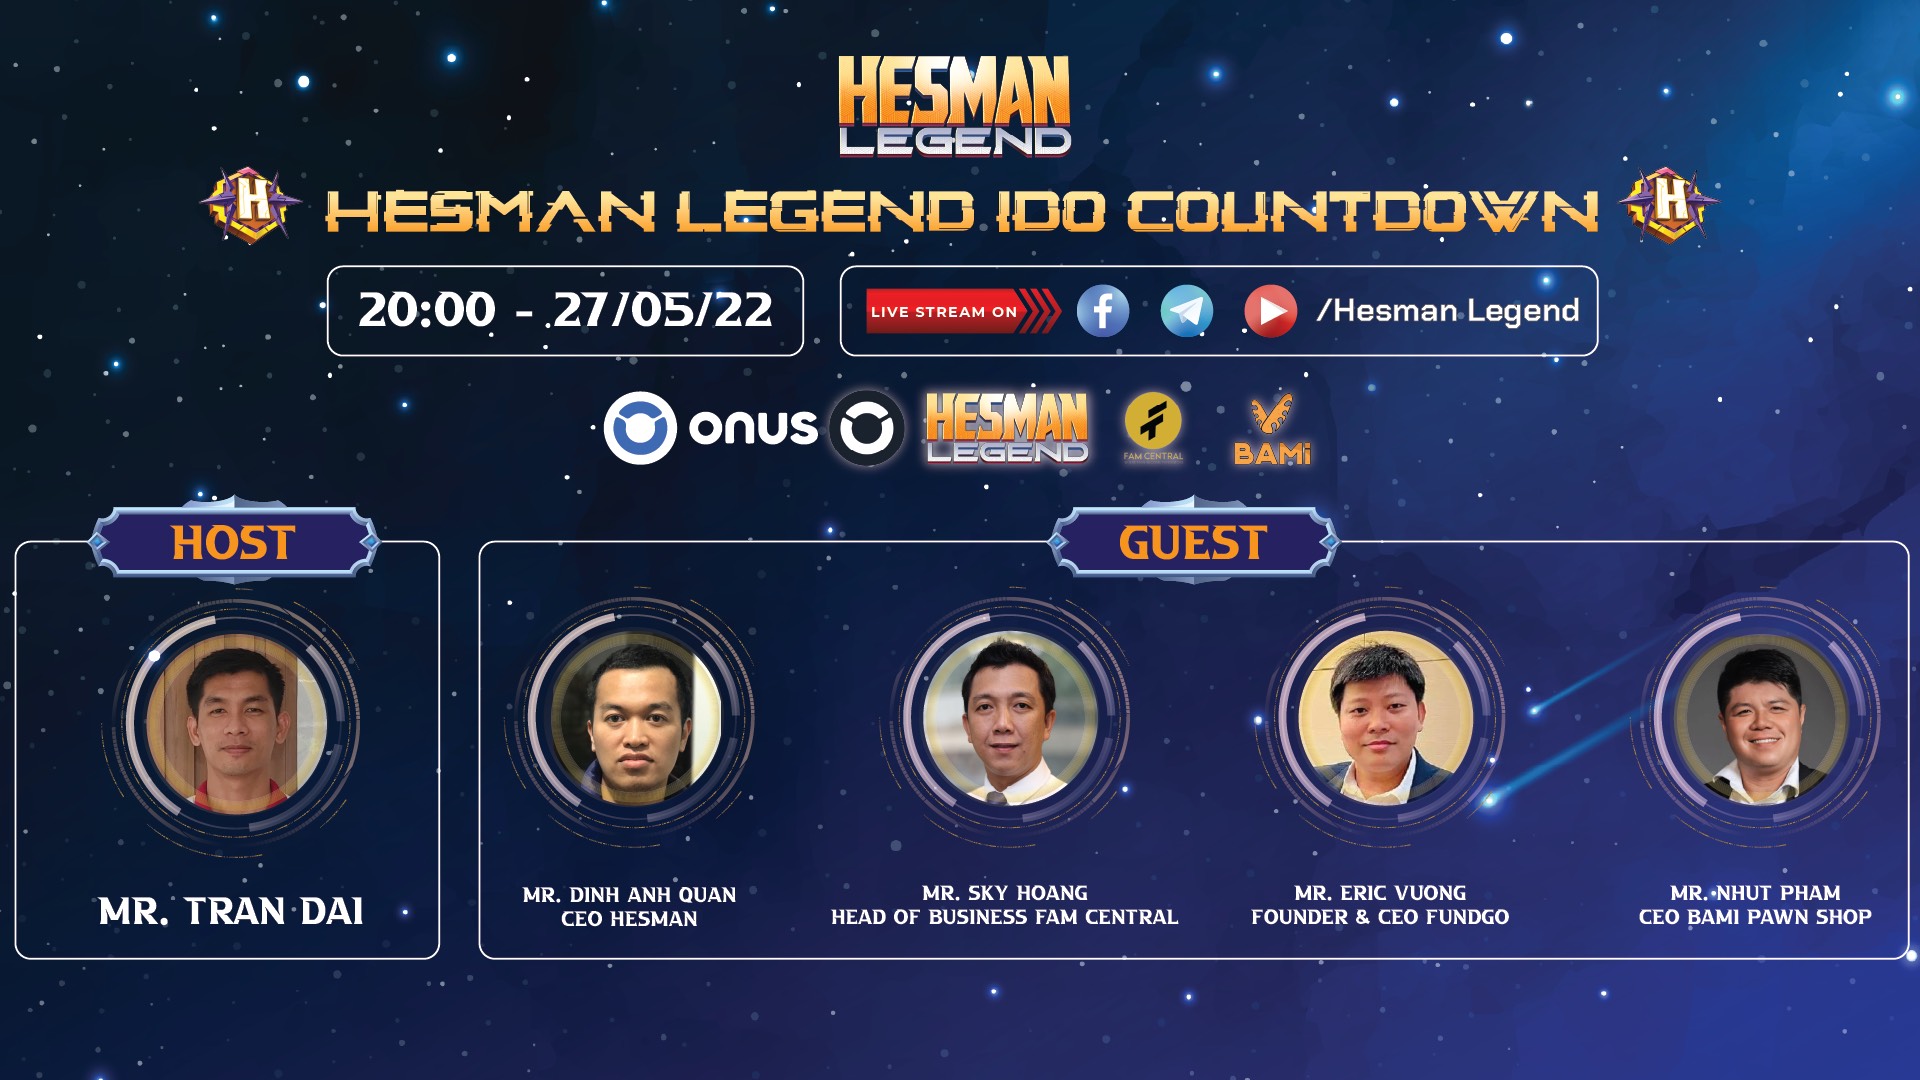 Bami Pawn Shop attends Hesman Legend’s IDO Countdown Event